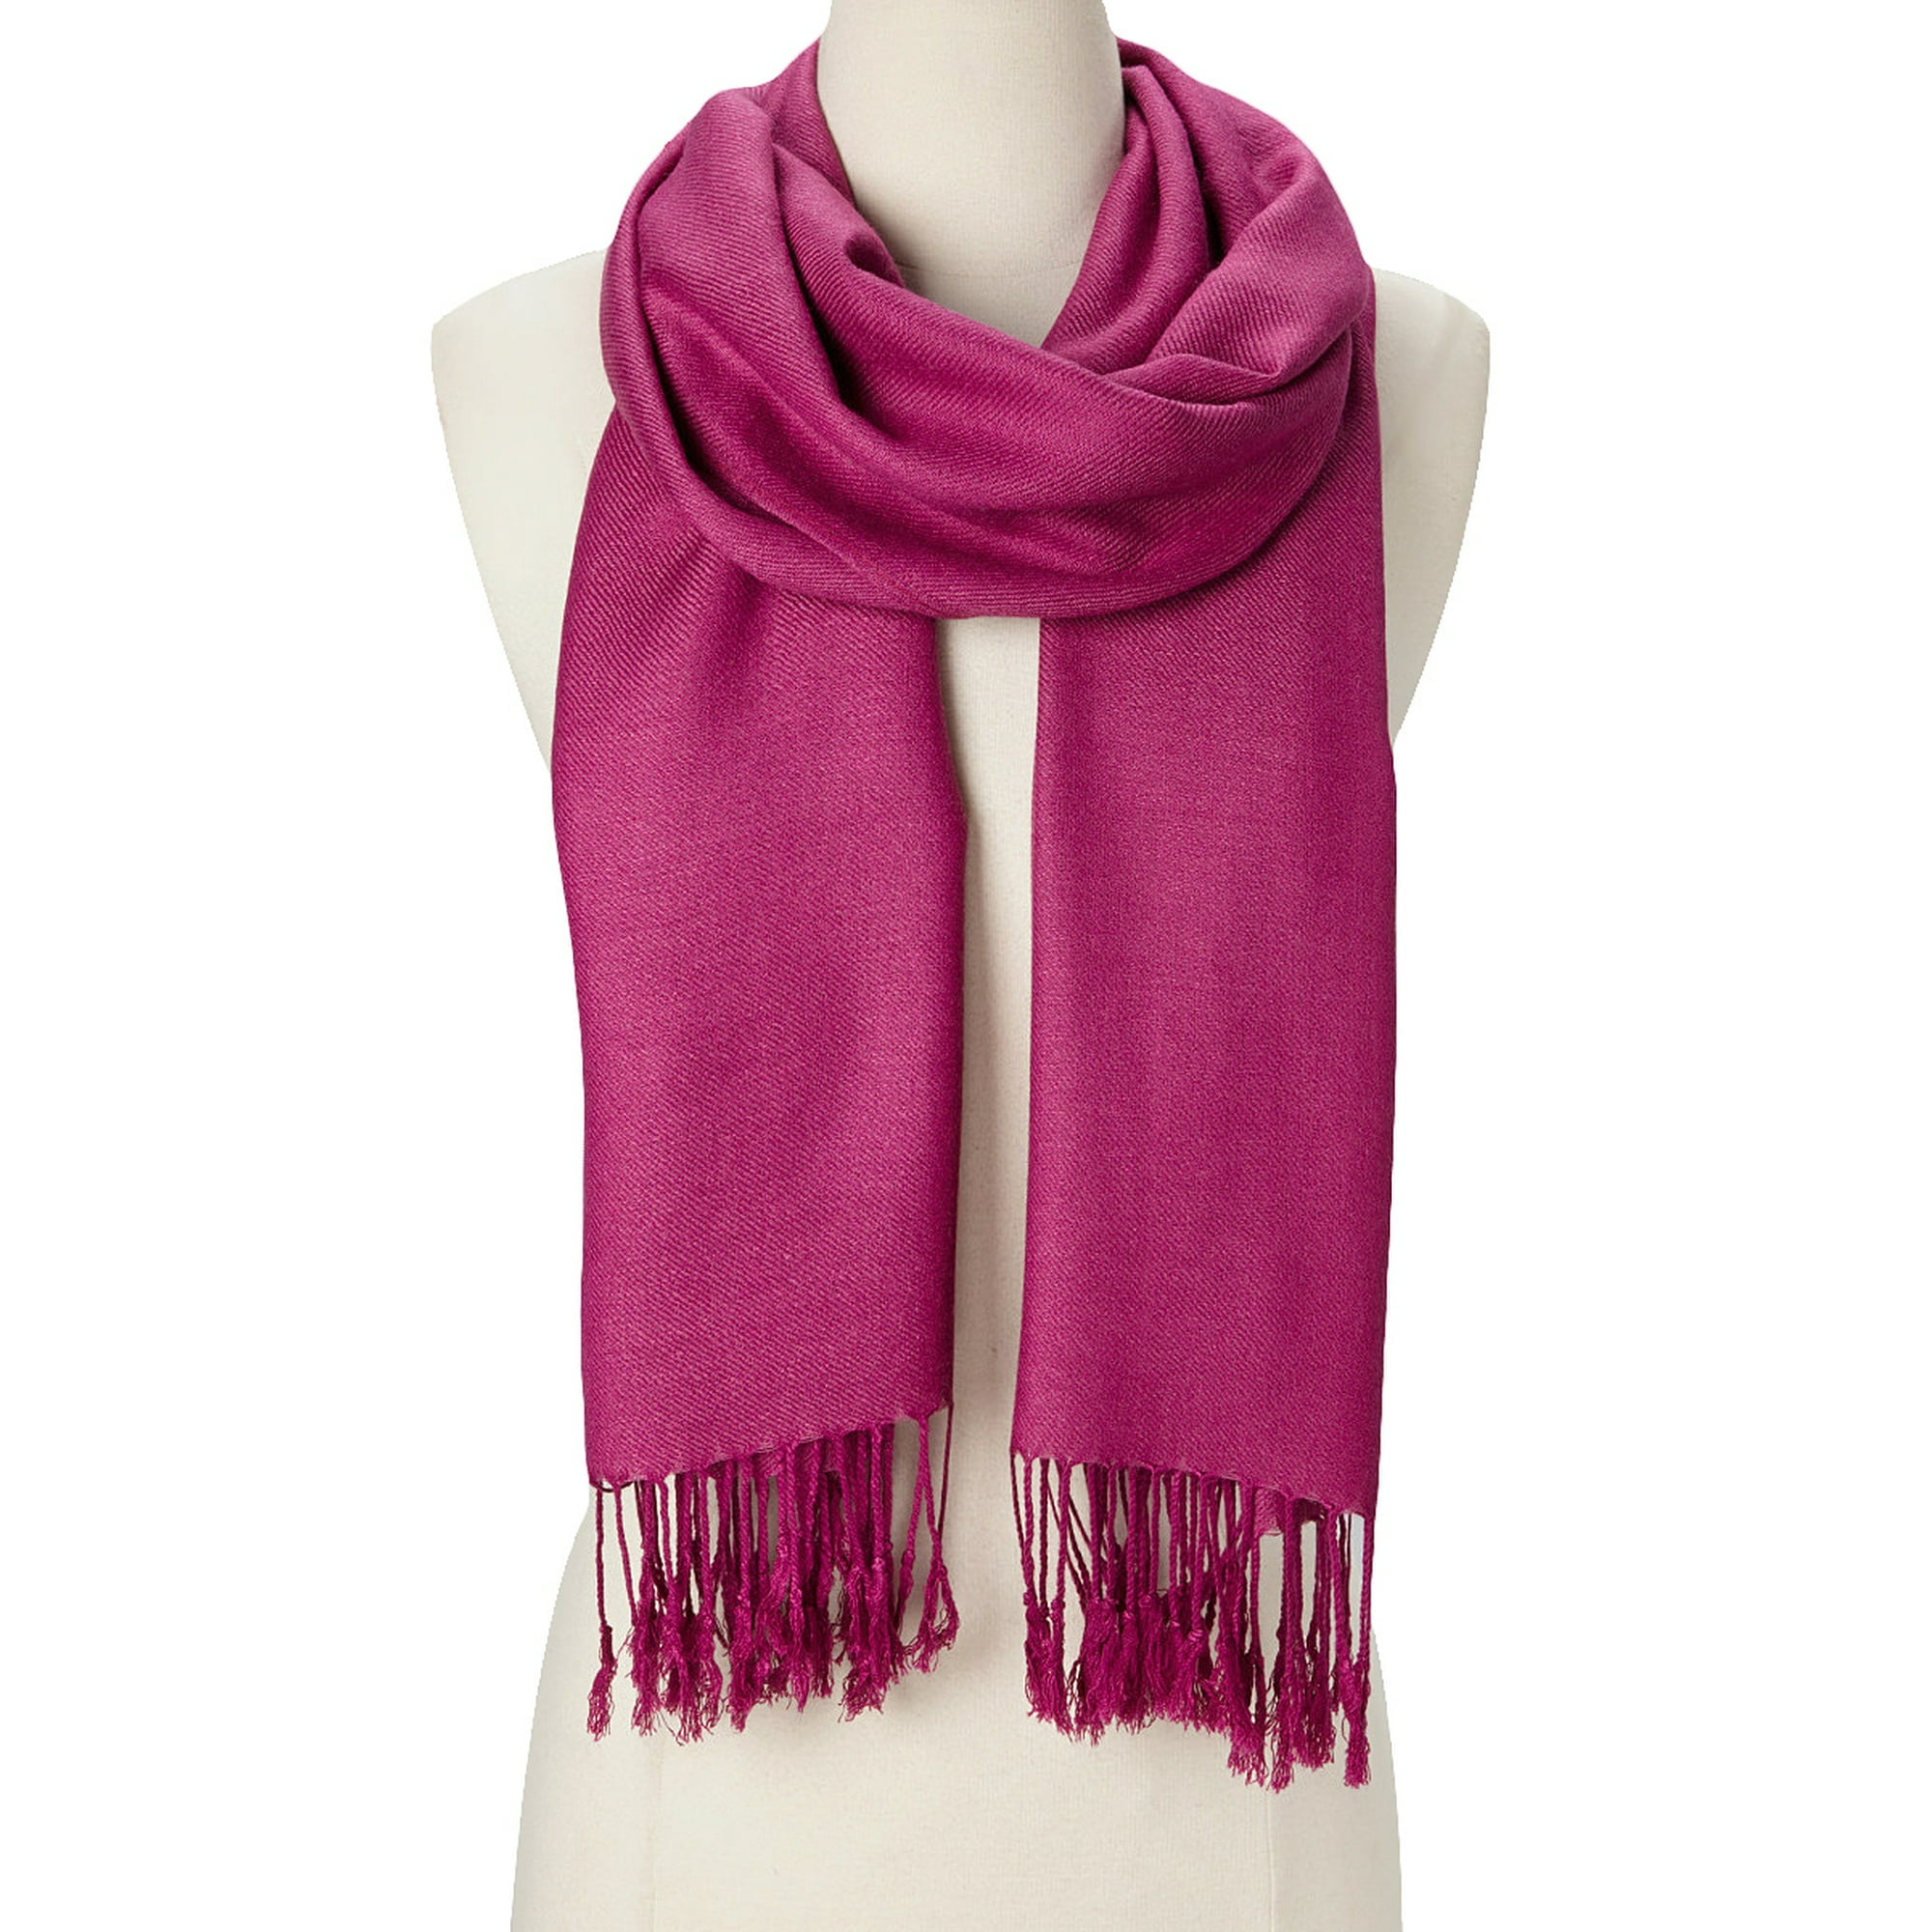 Womens Scarf in Hot Magenta Pink